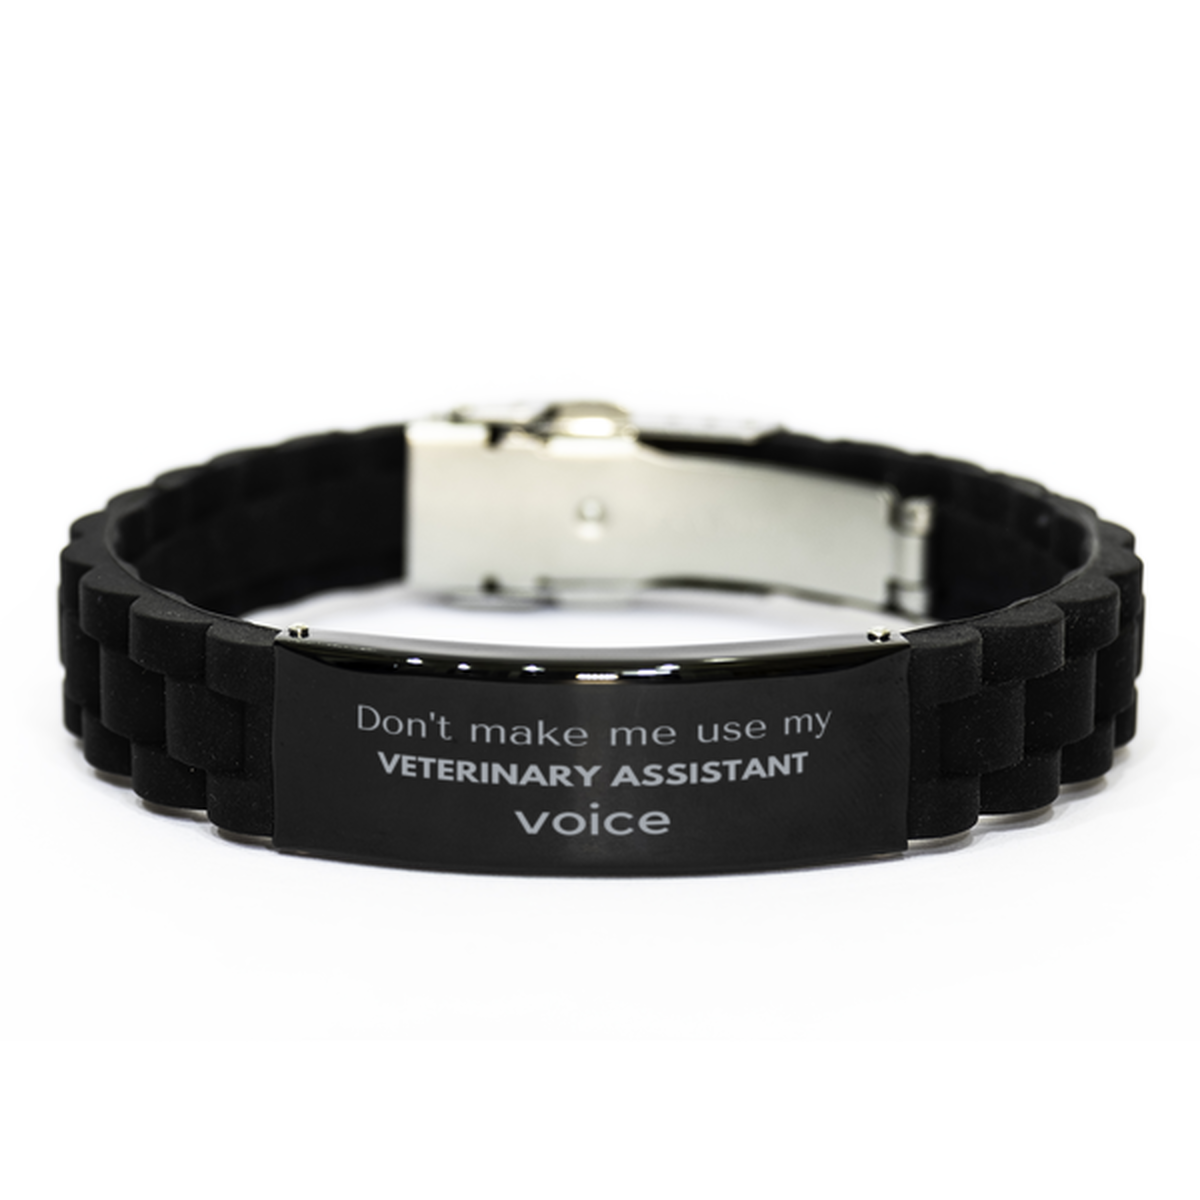 Don't make me use my Veterinary Assistant voice, Sarcasm Veterinary Assistant Gifts, Christmas Veterinary Assistant Black Glidelock Clasp Bracelet Birthday Unique Gifts For Veterinary Assistant Coworkers, Men, Women, Colleague, Friends